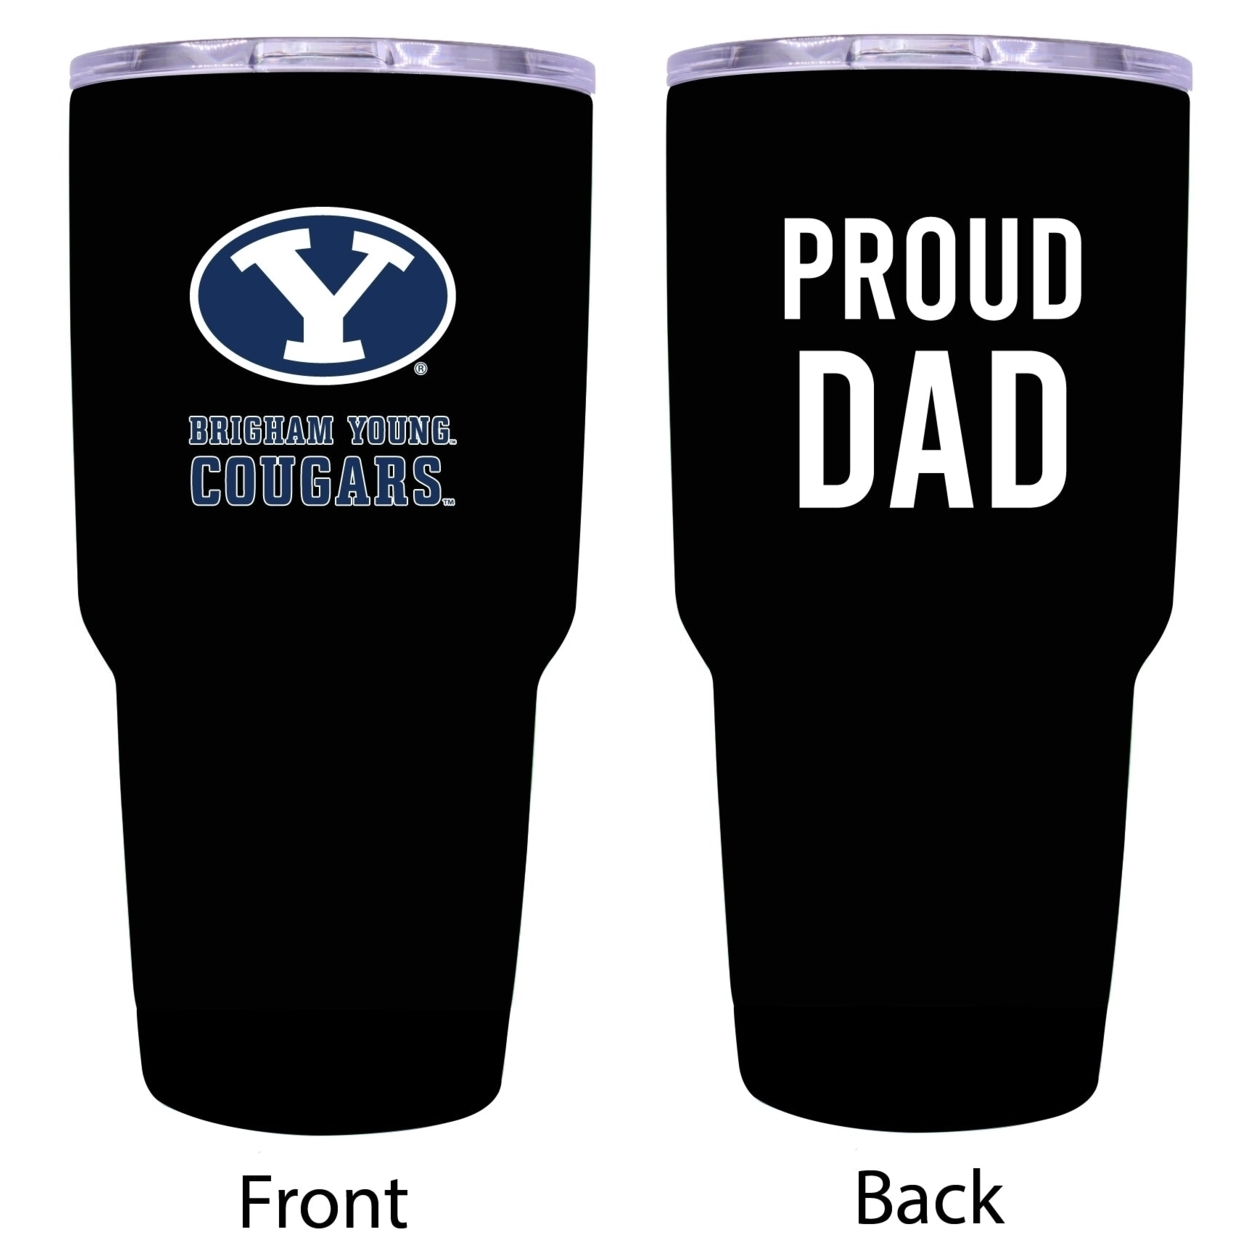 Brigham Young Cougars Proud Dad 24 Oz Insulated Stainless Steel Tumblers Black.